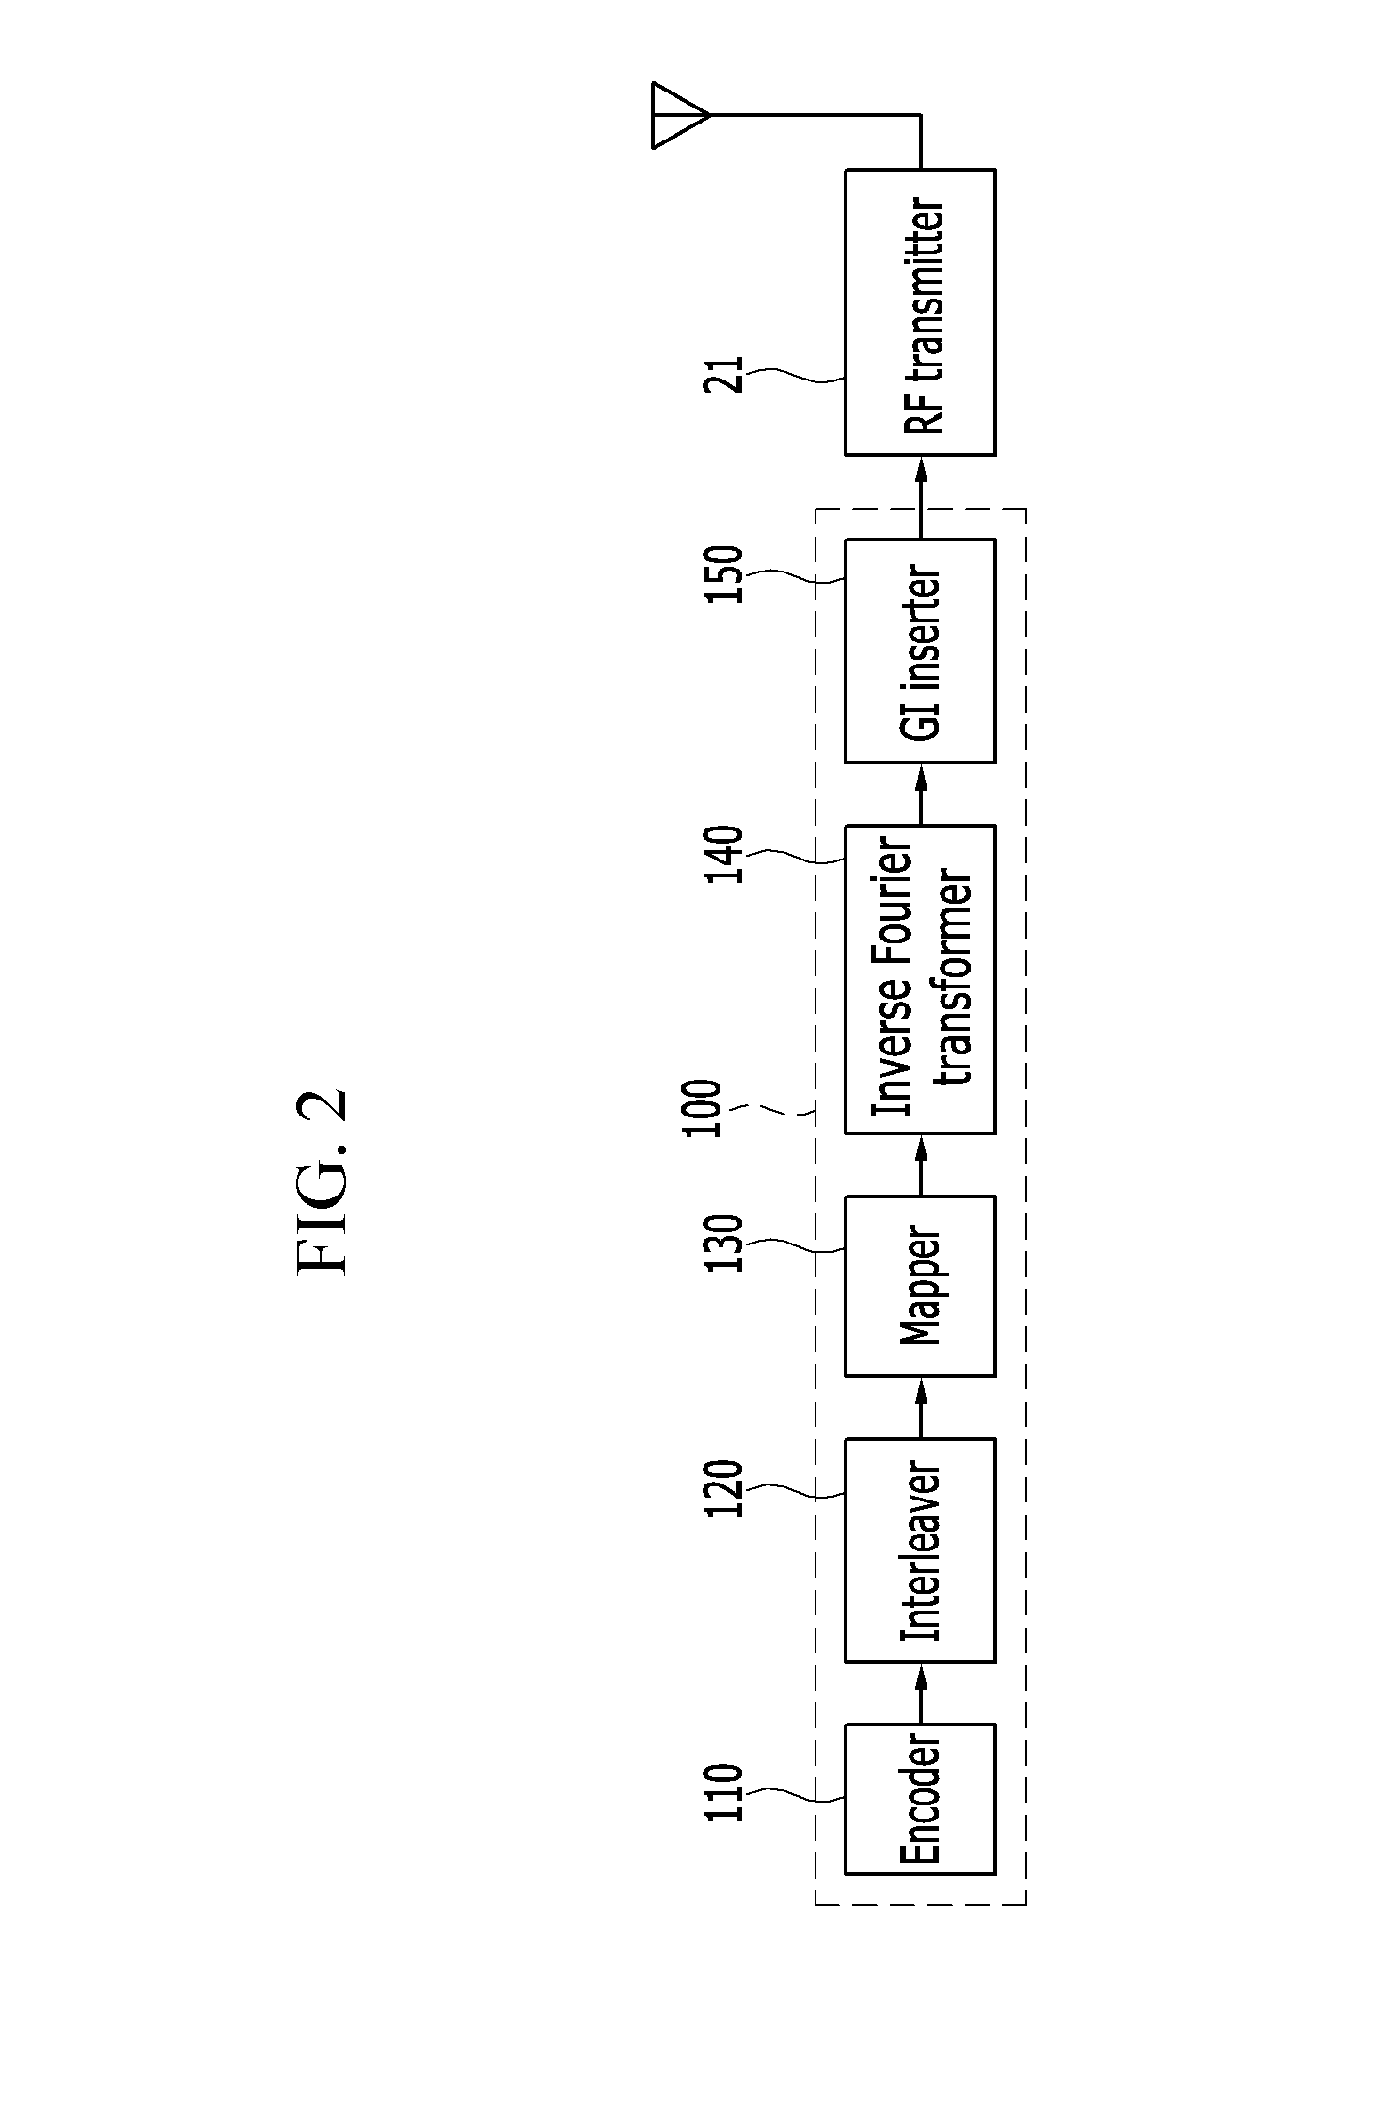 Method for transmitting frame, clear channel assessment method, and apparatus implementing the same method